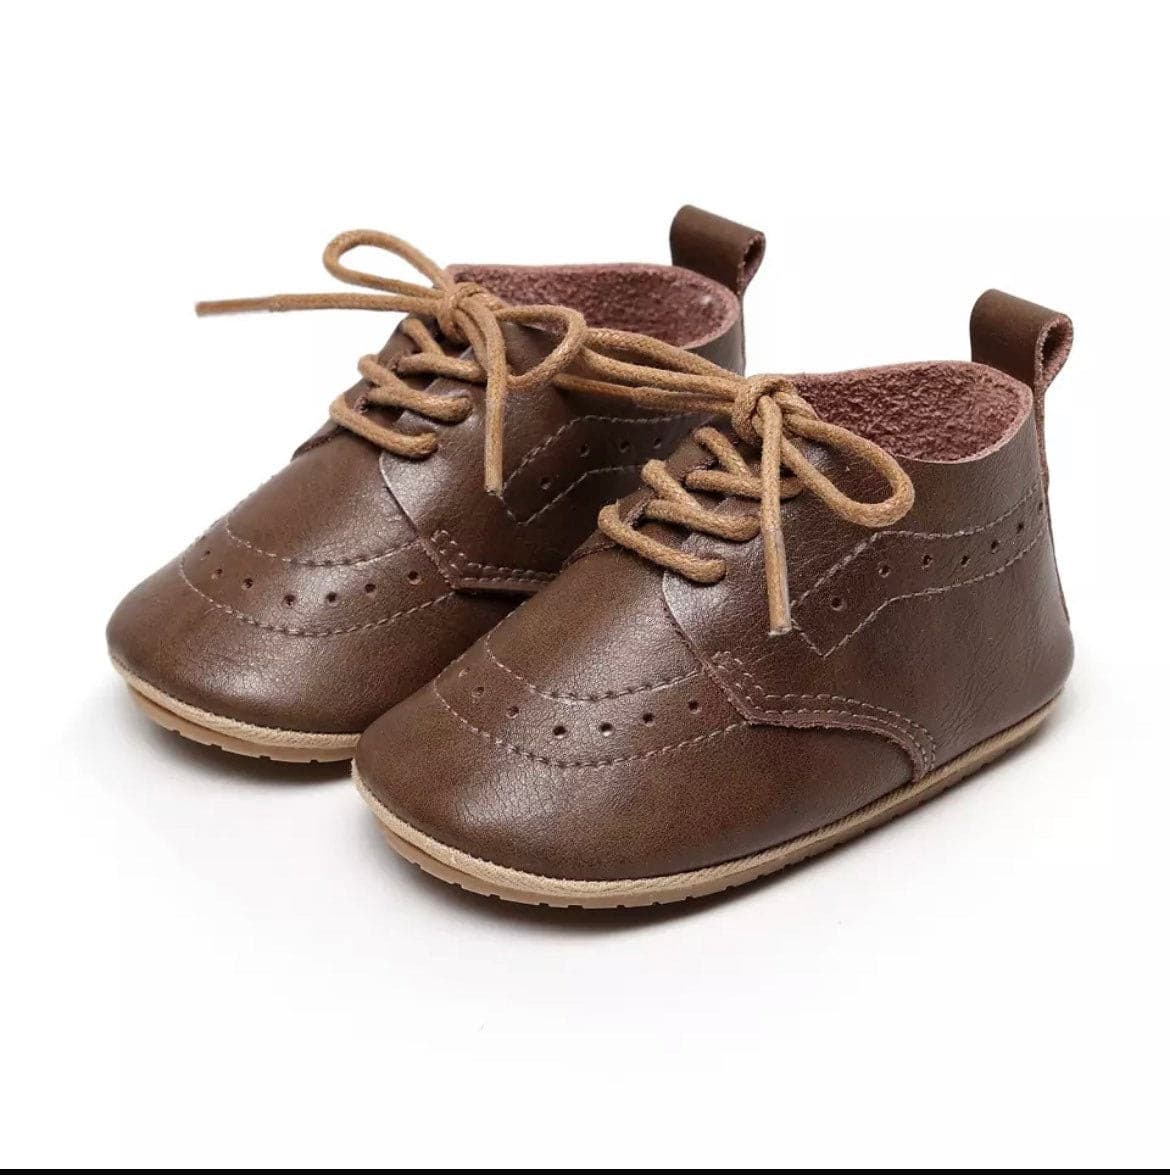 Baby Oxford Brogues - Handmade Genuine Leather Baby Shoes, Tan Leather-These are gorgeous leather baby shoes, baby oxford shoes or baby brogues as known by many.
Baby Brogues - Handmade Genuine Leather Baby Shoes, in Tan Leather.Differe-Bijou Bubs